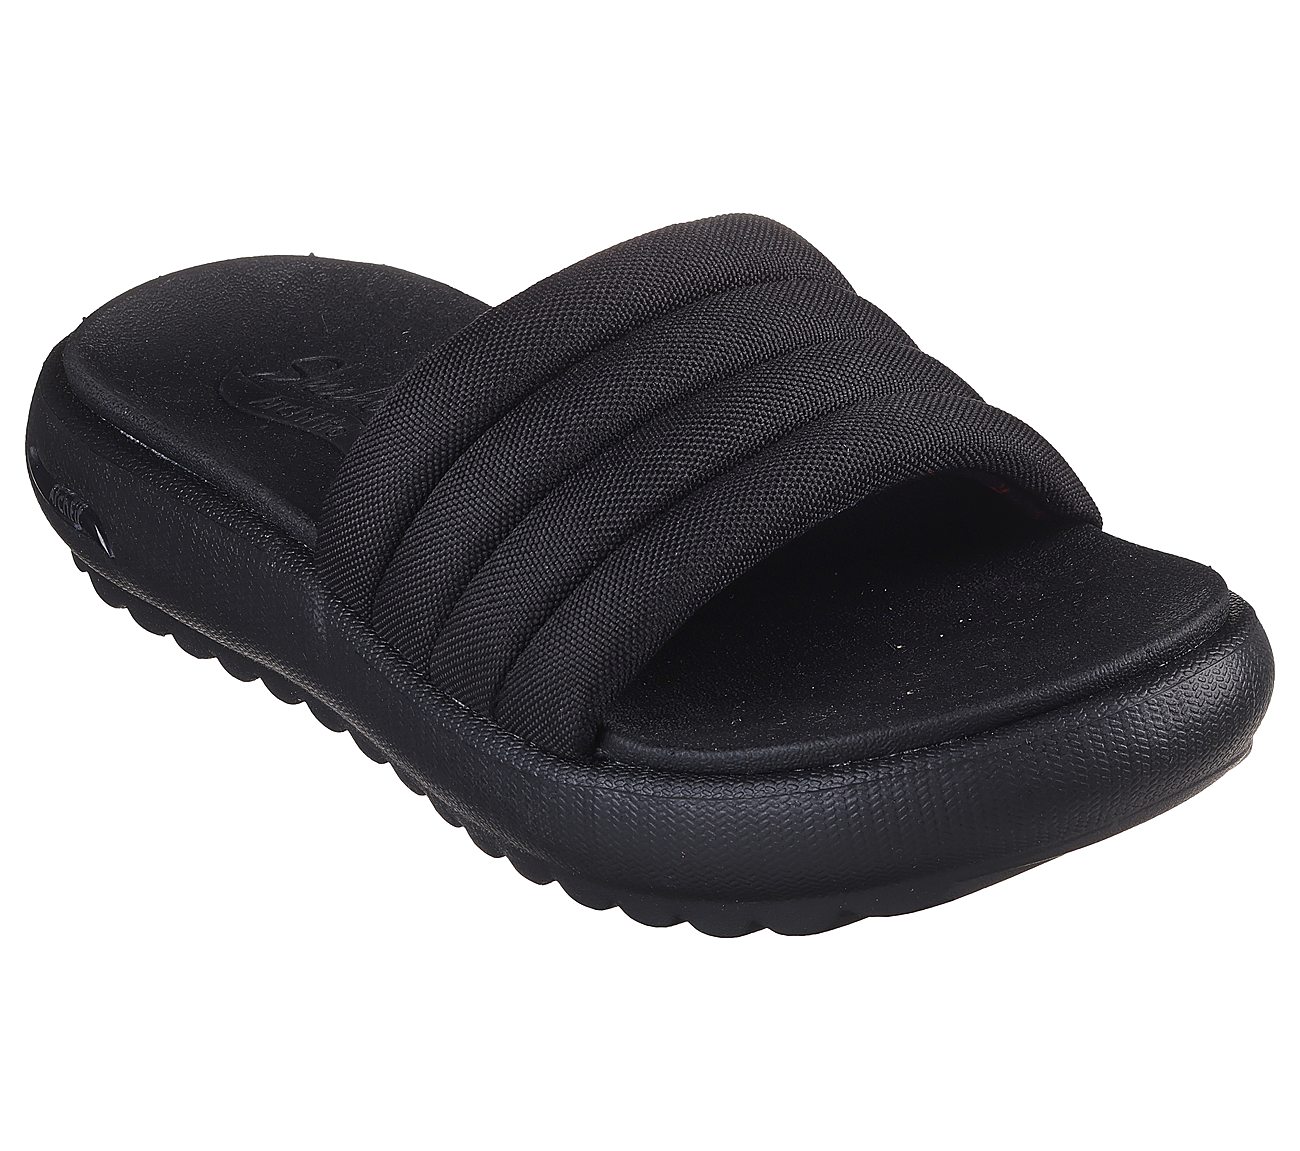 ARCH FIT CLOUD, BBLACK Footwear Lateral View